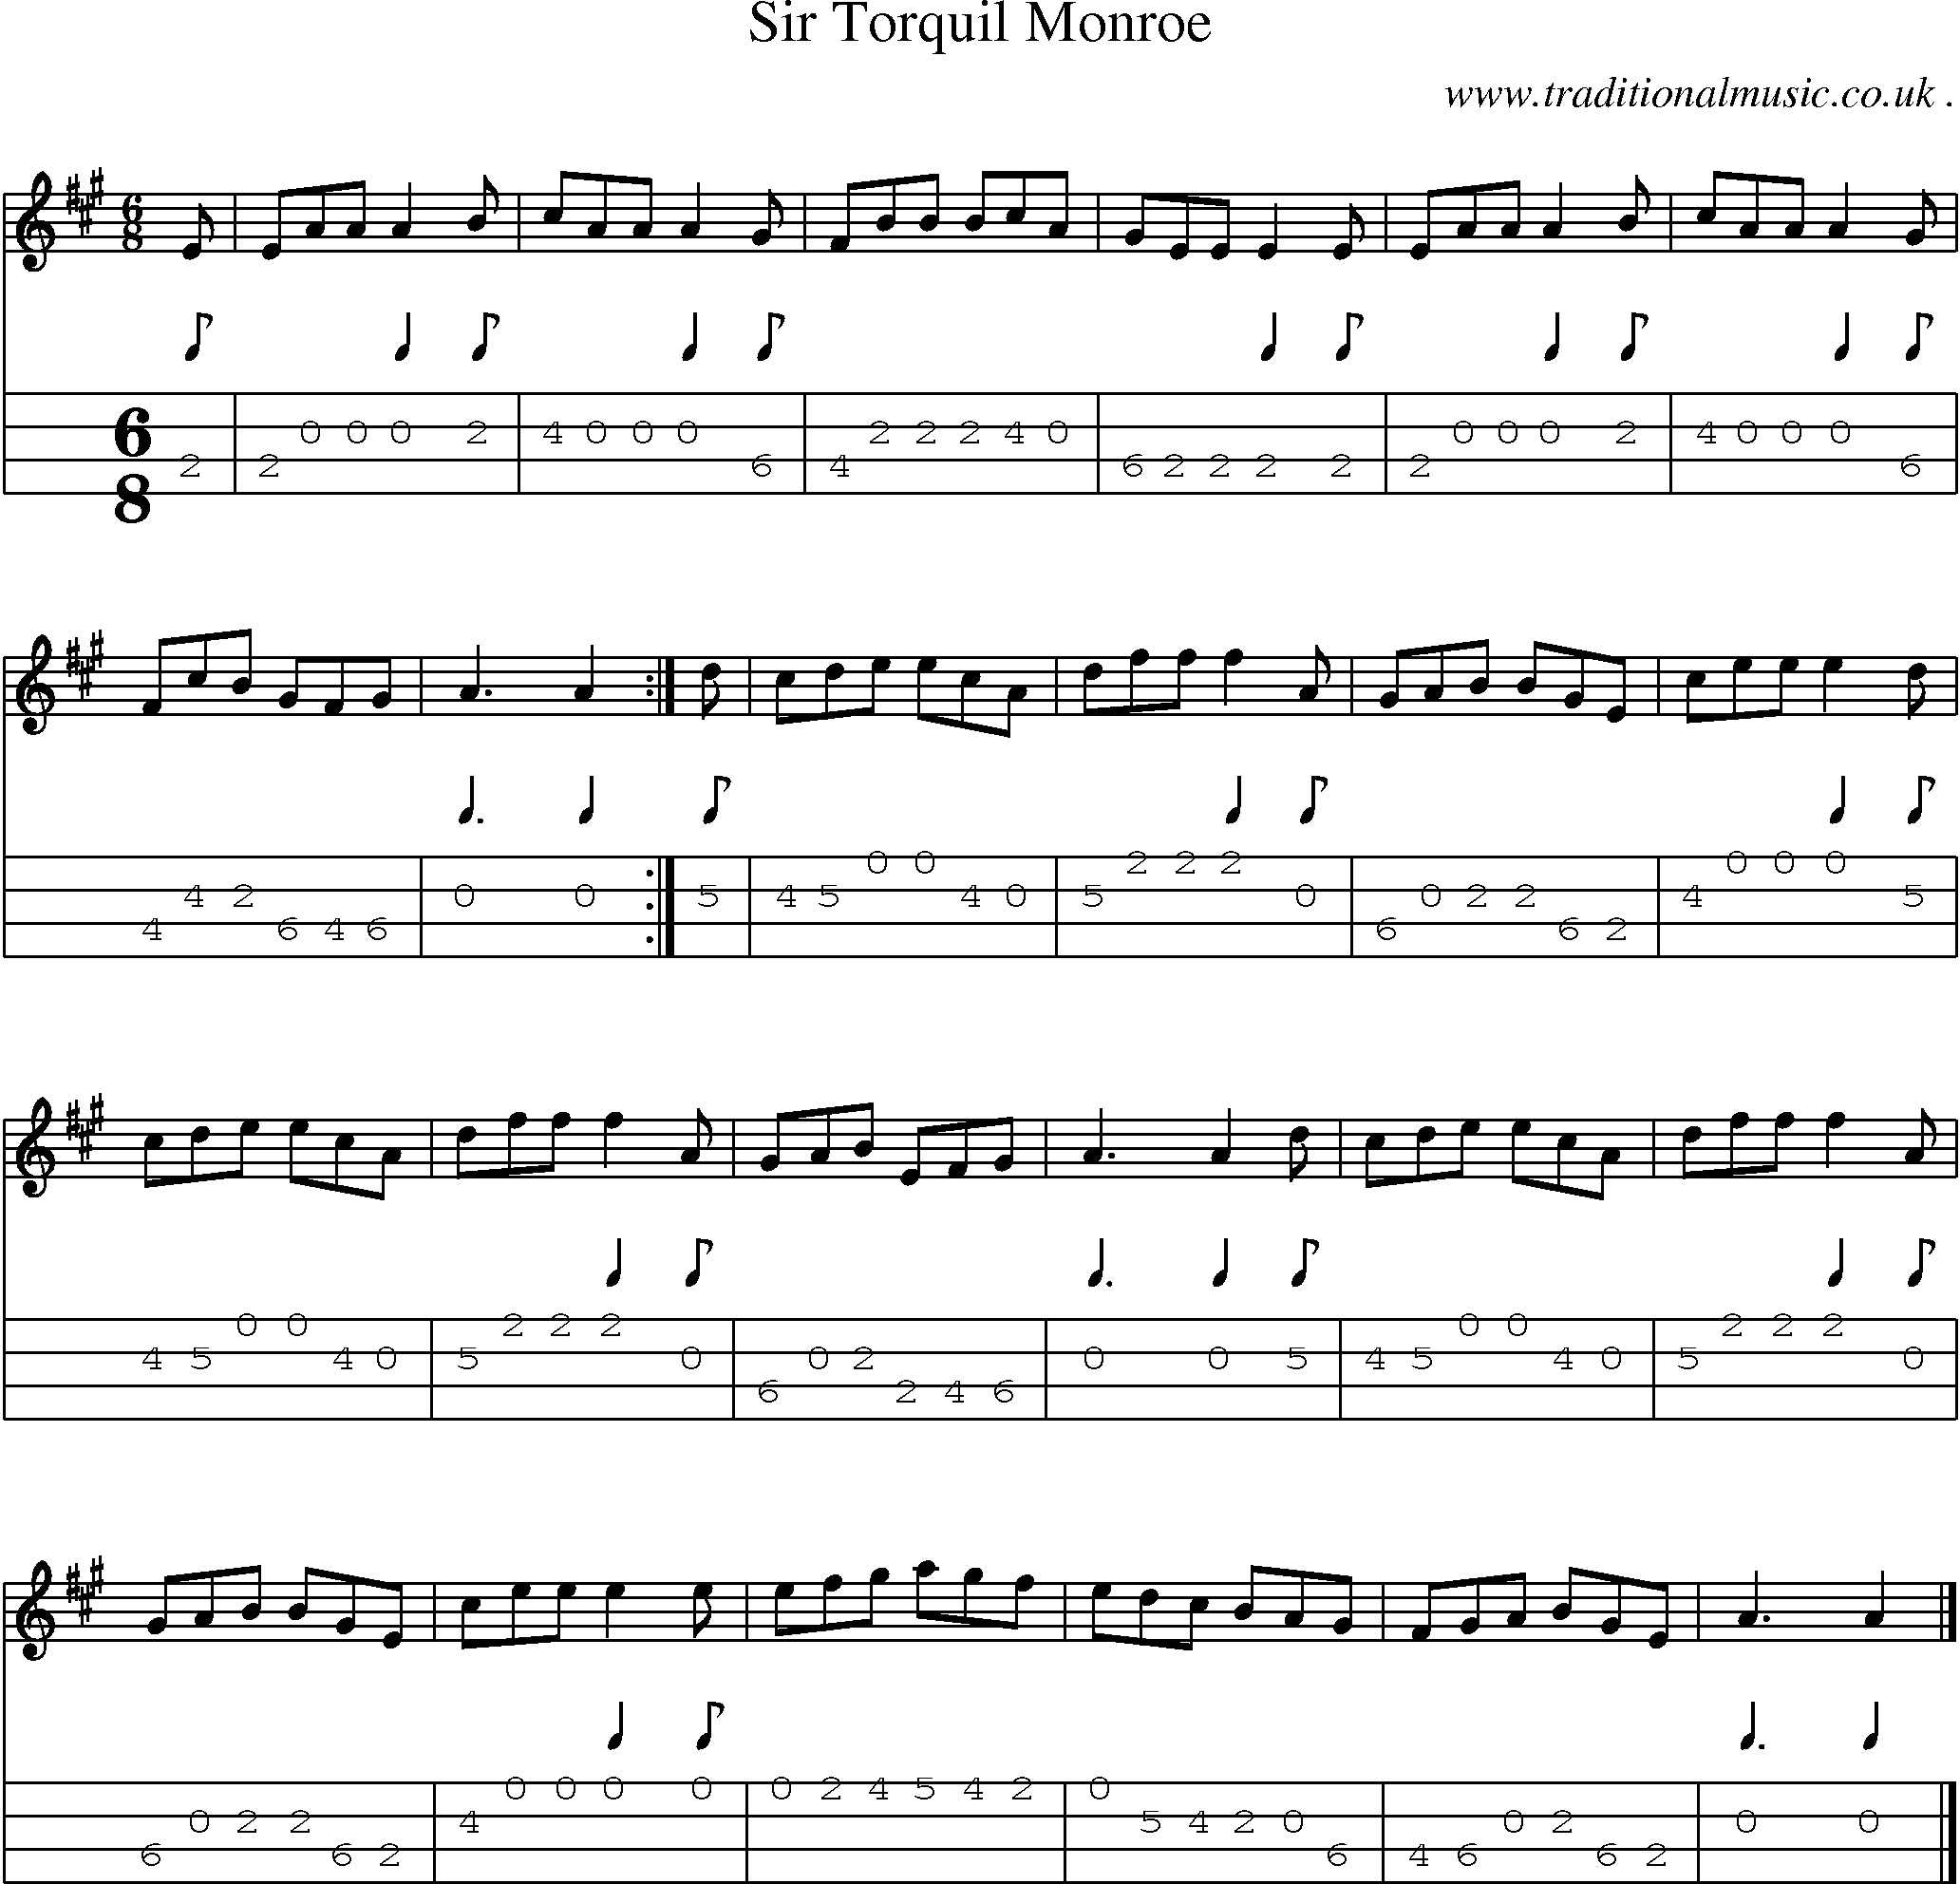 Sheet-music  score, Chords and Mandolin Tabs for Sir Torquil Monroe